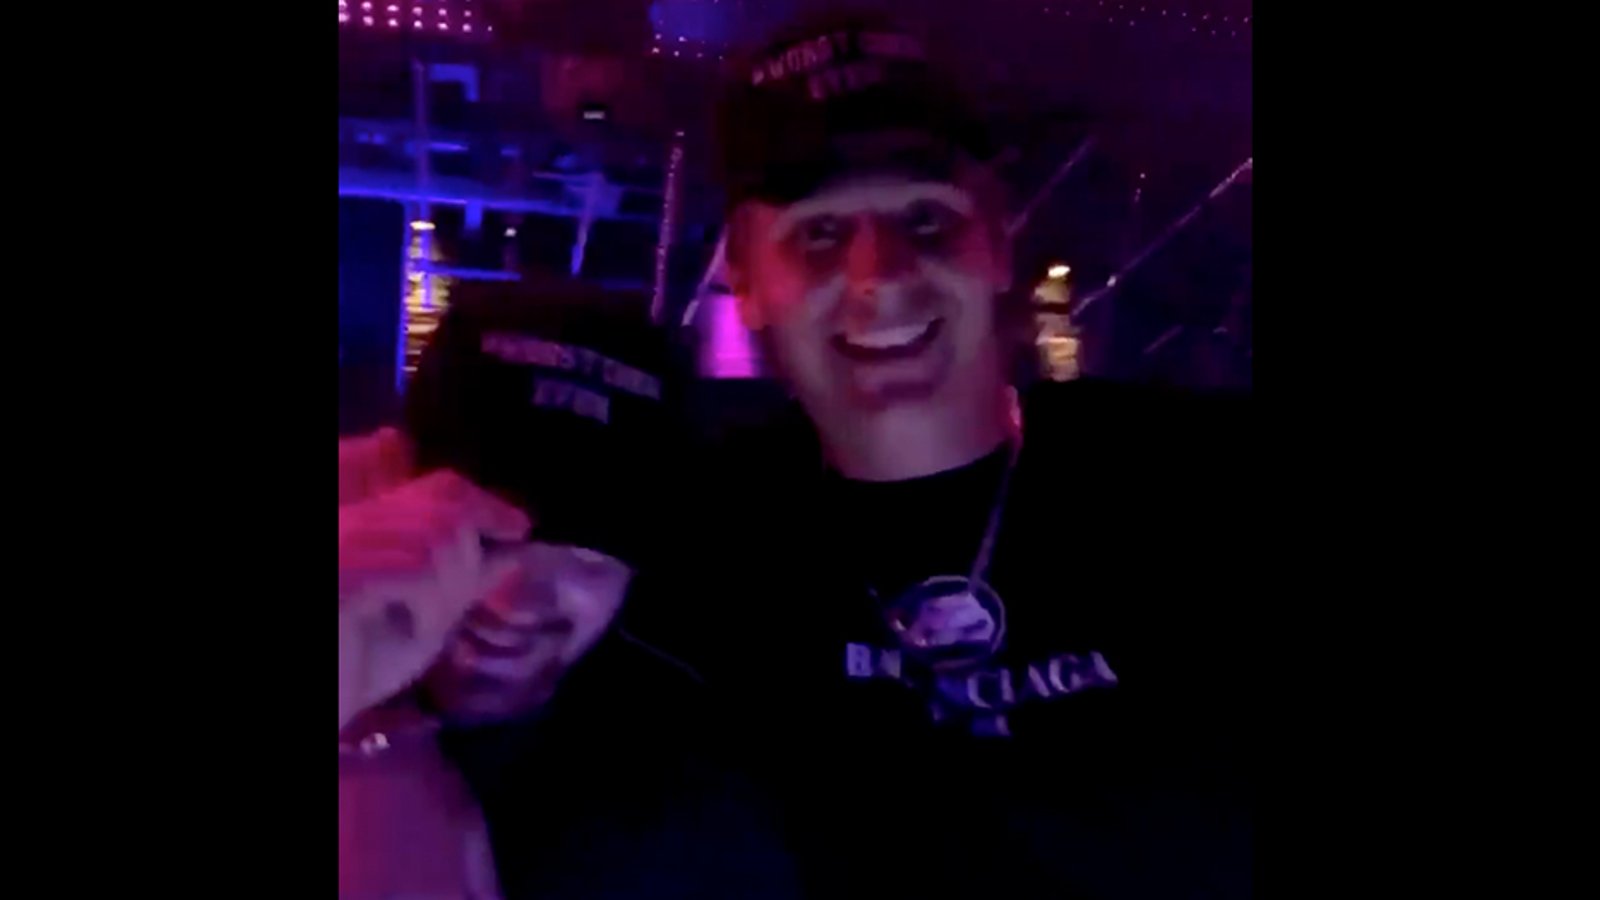 Jake Virtanen sets off controversy after posting videos of himself in Vancouver nightclub